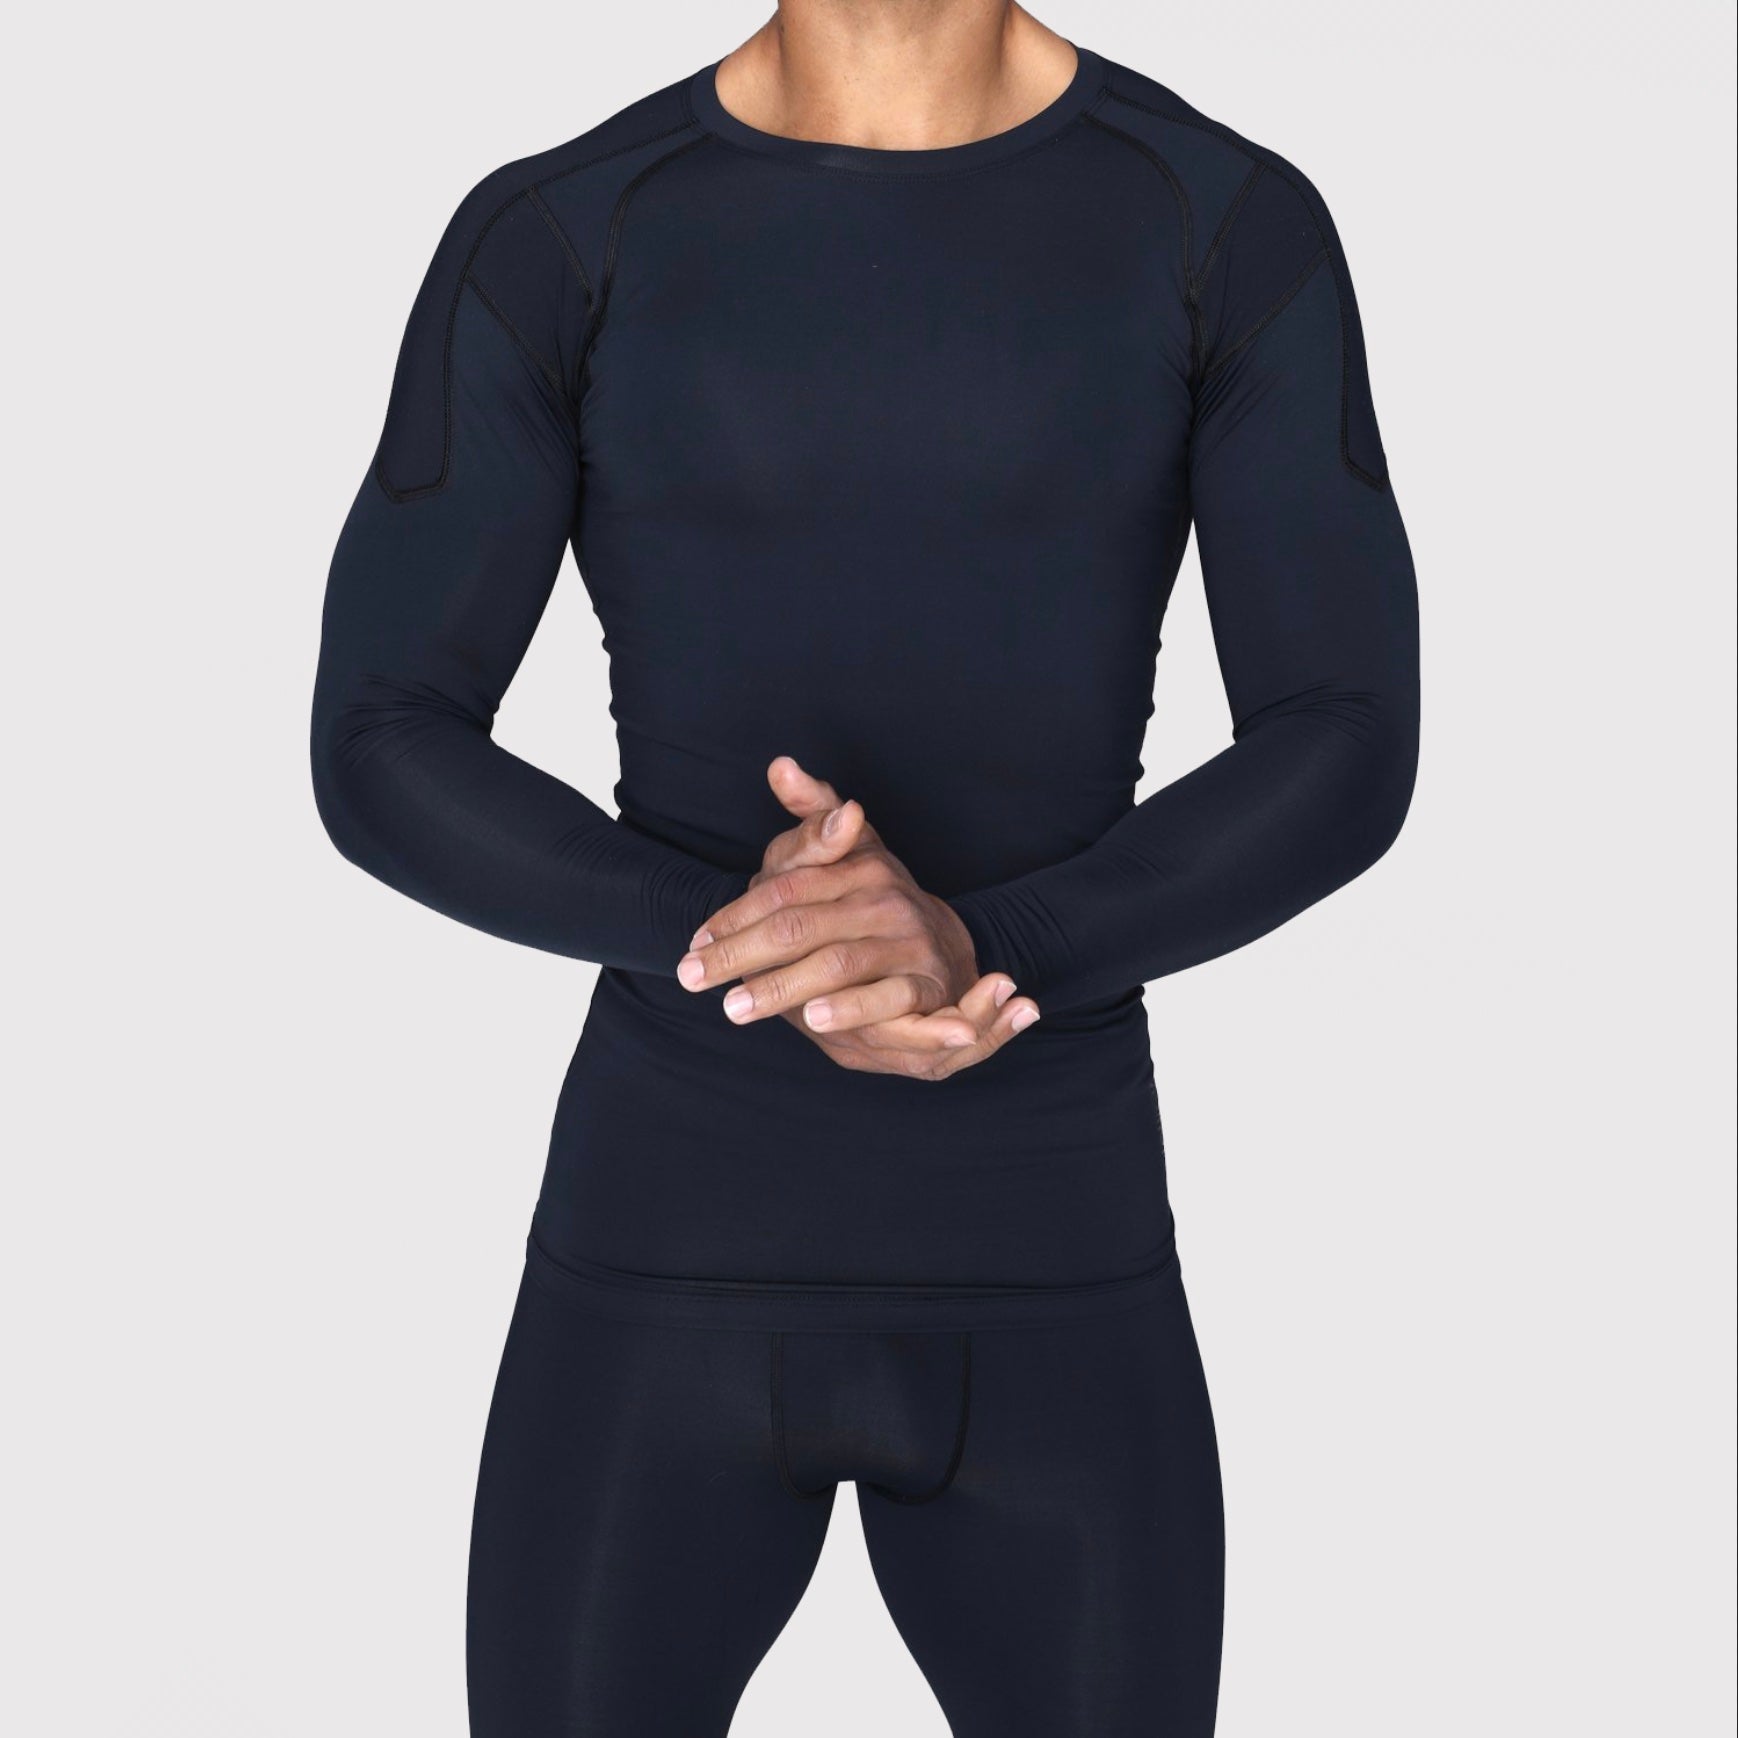 Men's compression shirts are versatile garments that offer both performance benefits and style options. When it comes to pairing